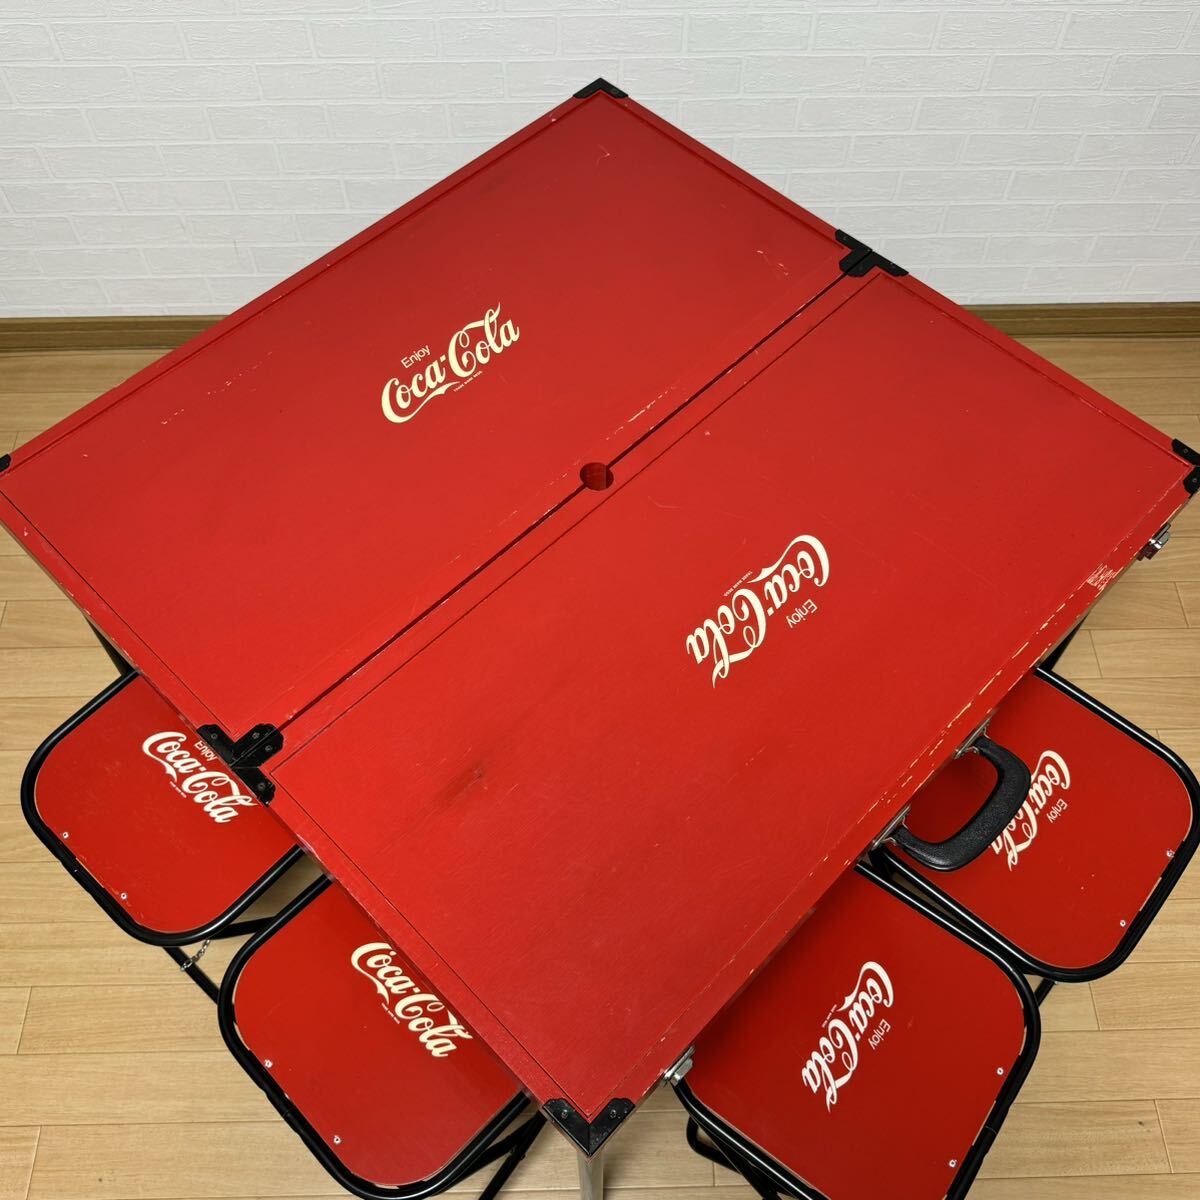 [ valuable ]CocaCola Coca Cola folding table & chair 4 legs rare goods valuable goods hard-to-find not for sale Coca-Cola Coca * Cola 